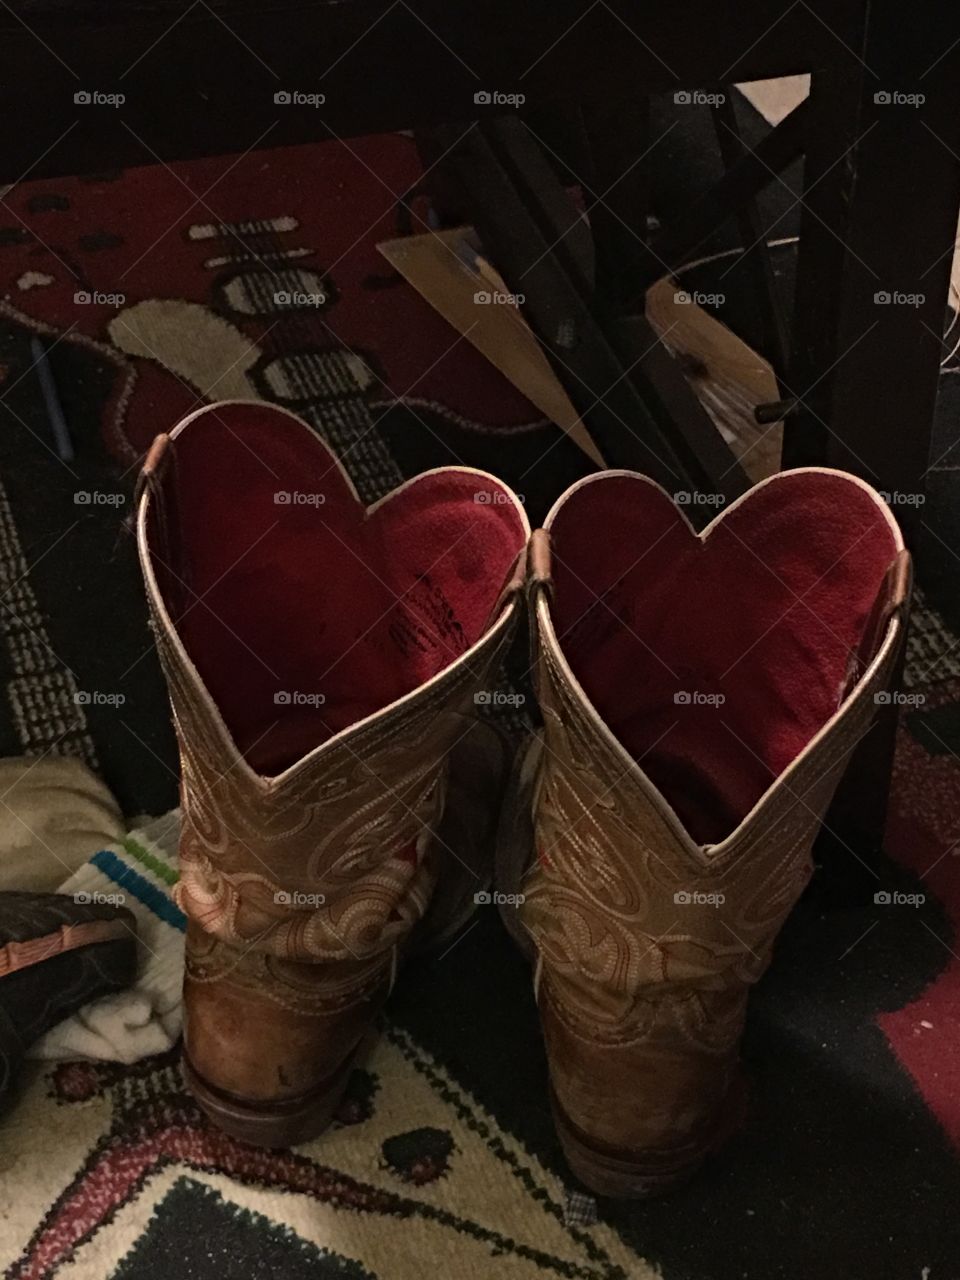 When boots love you back
